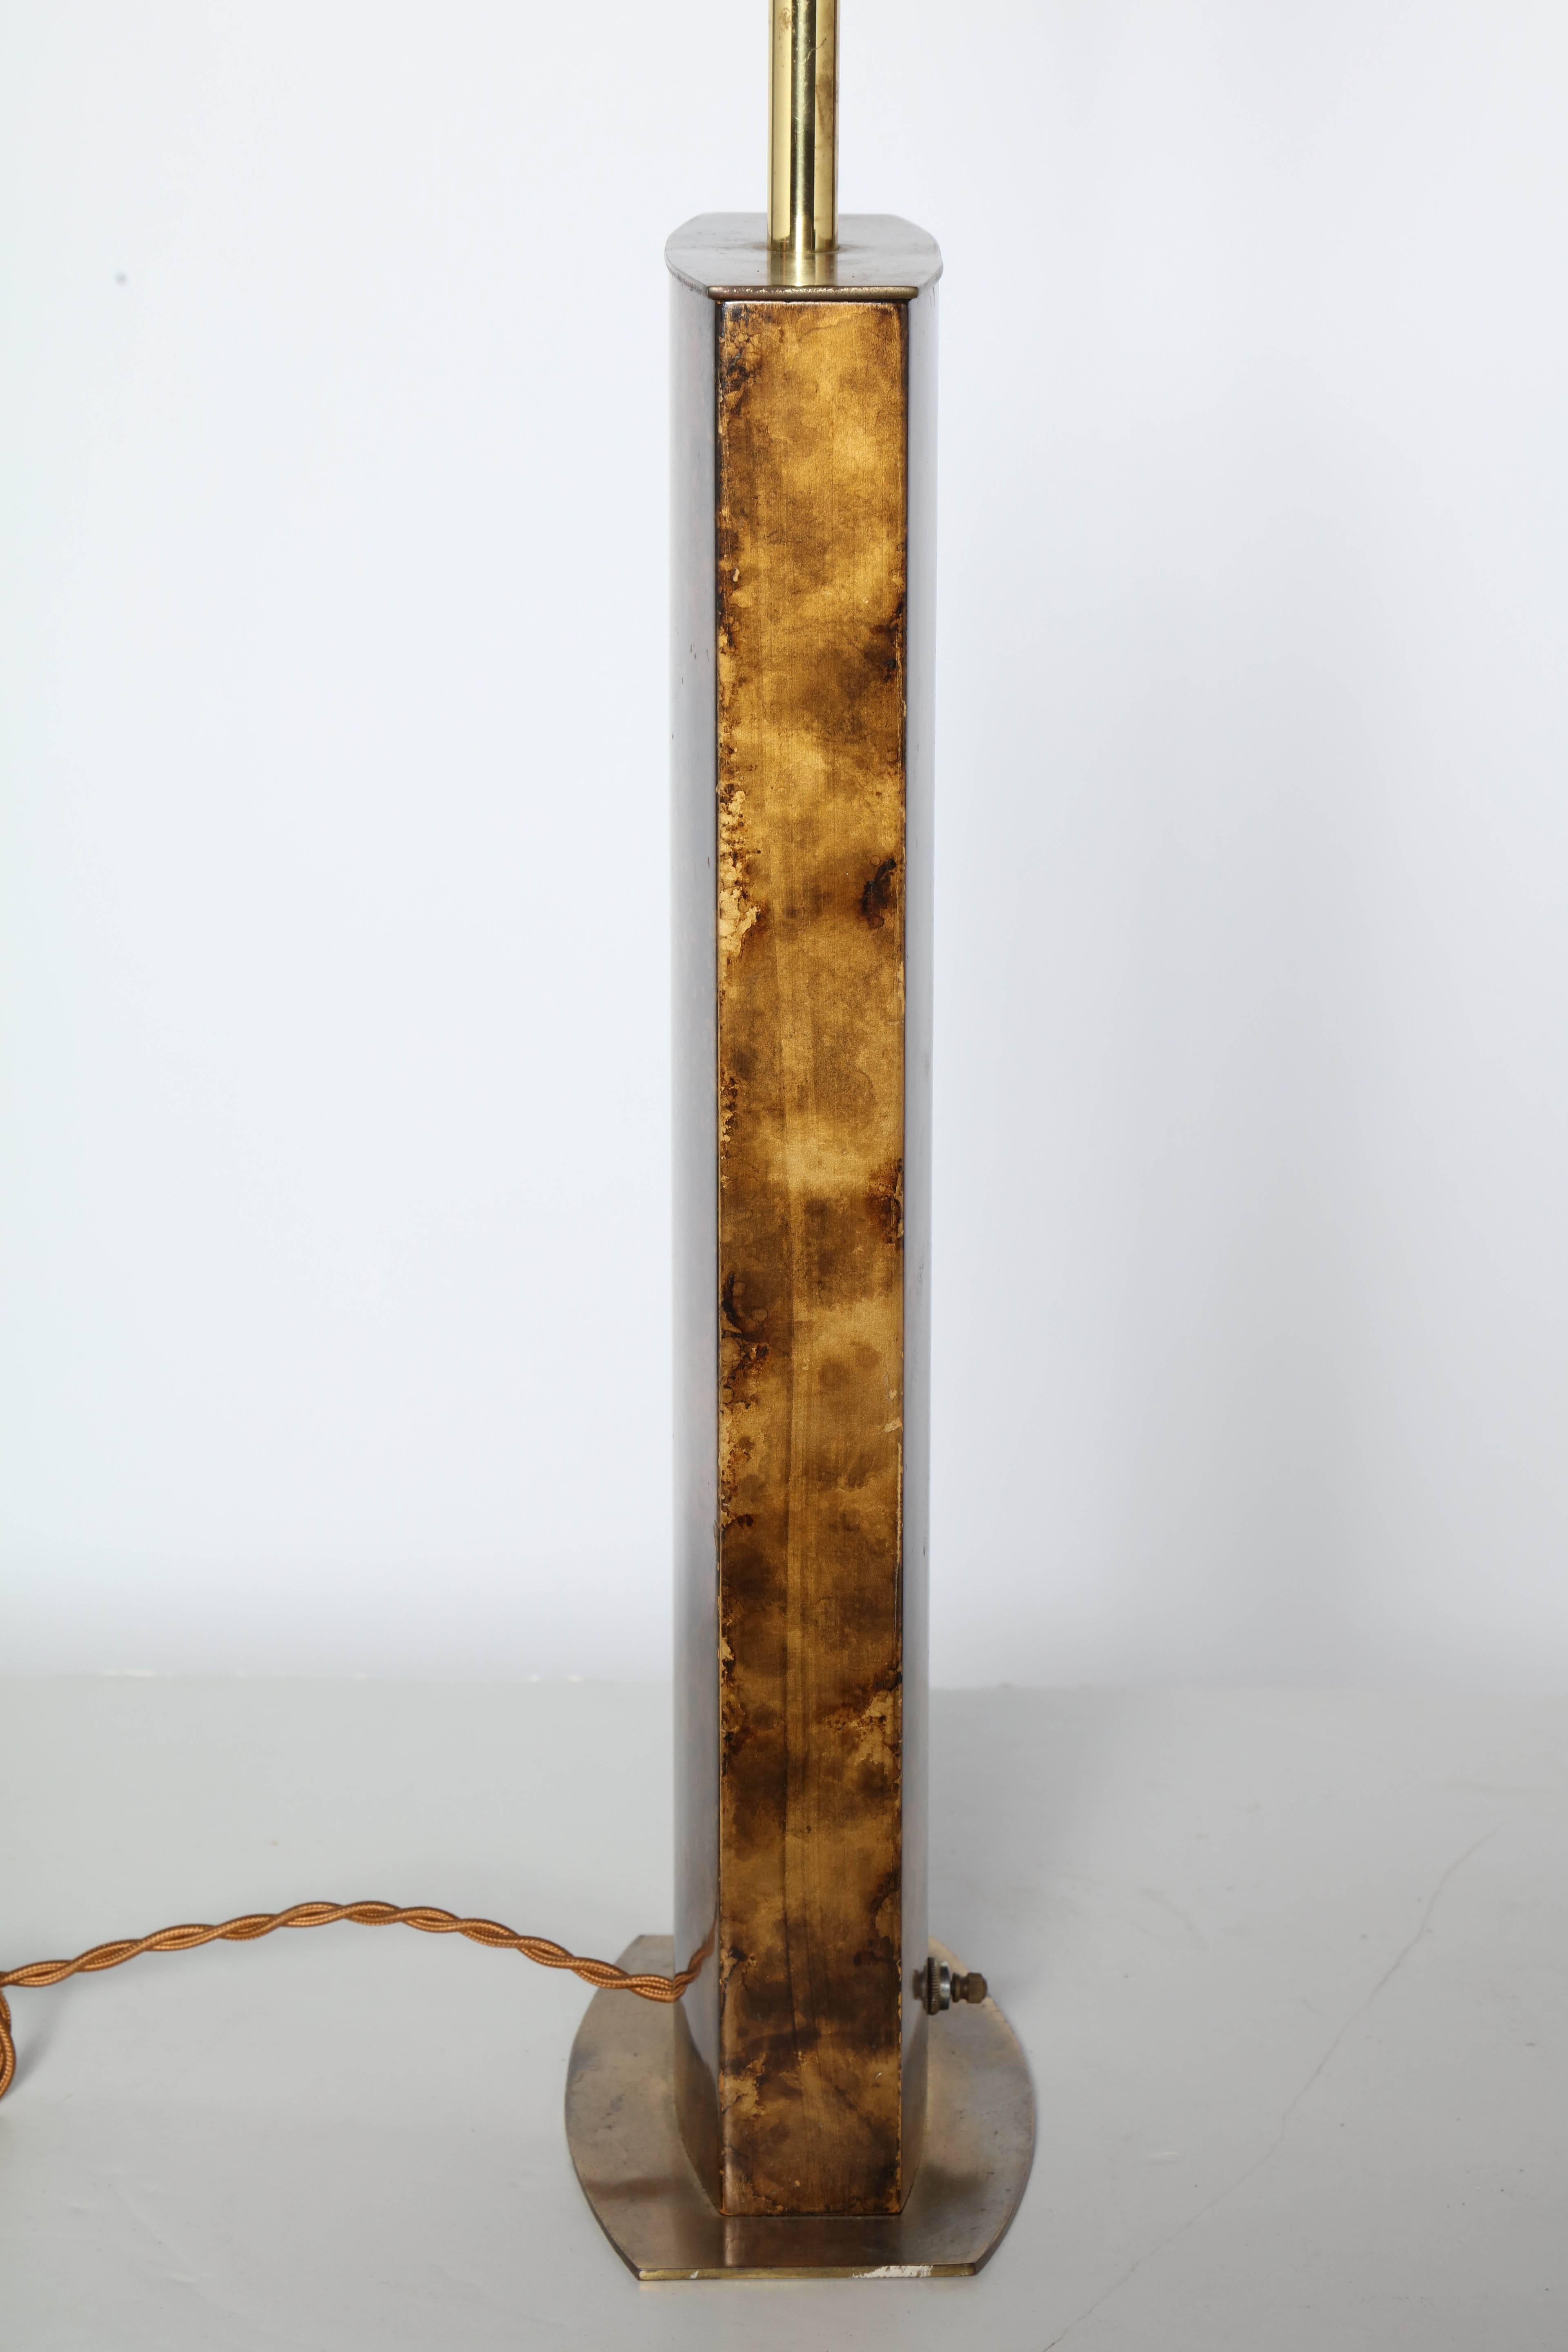 Lacquered Tall Mutual Sunset Lamp Co. Faux Tortoise Shell Oil Drop Table Lamp. Circa 1960